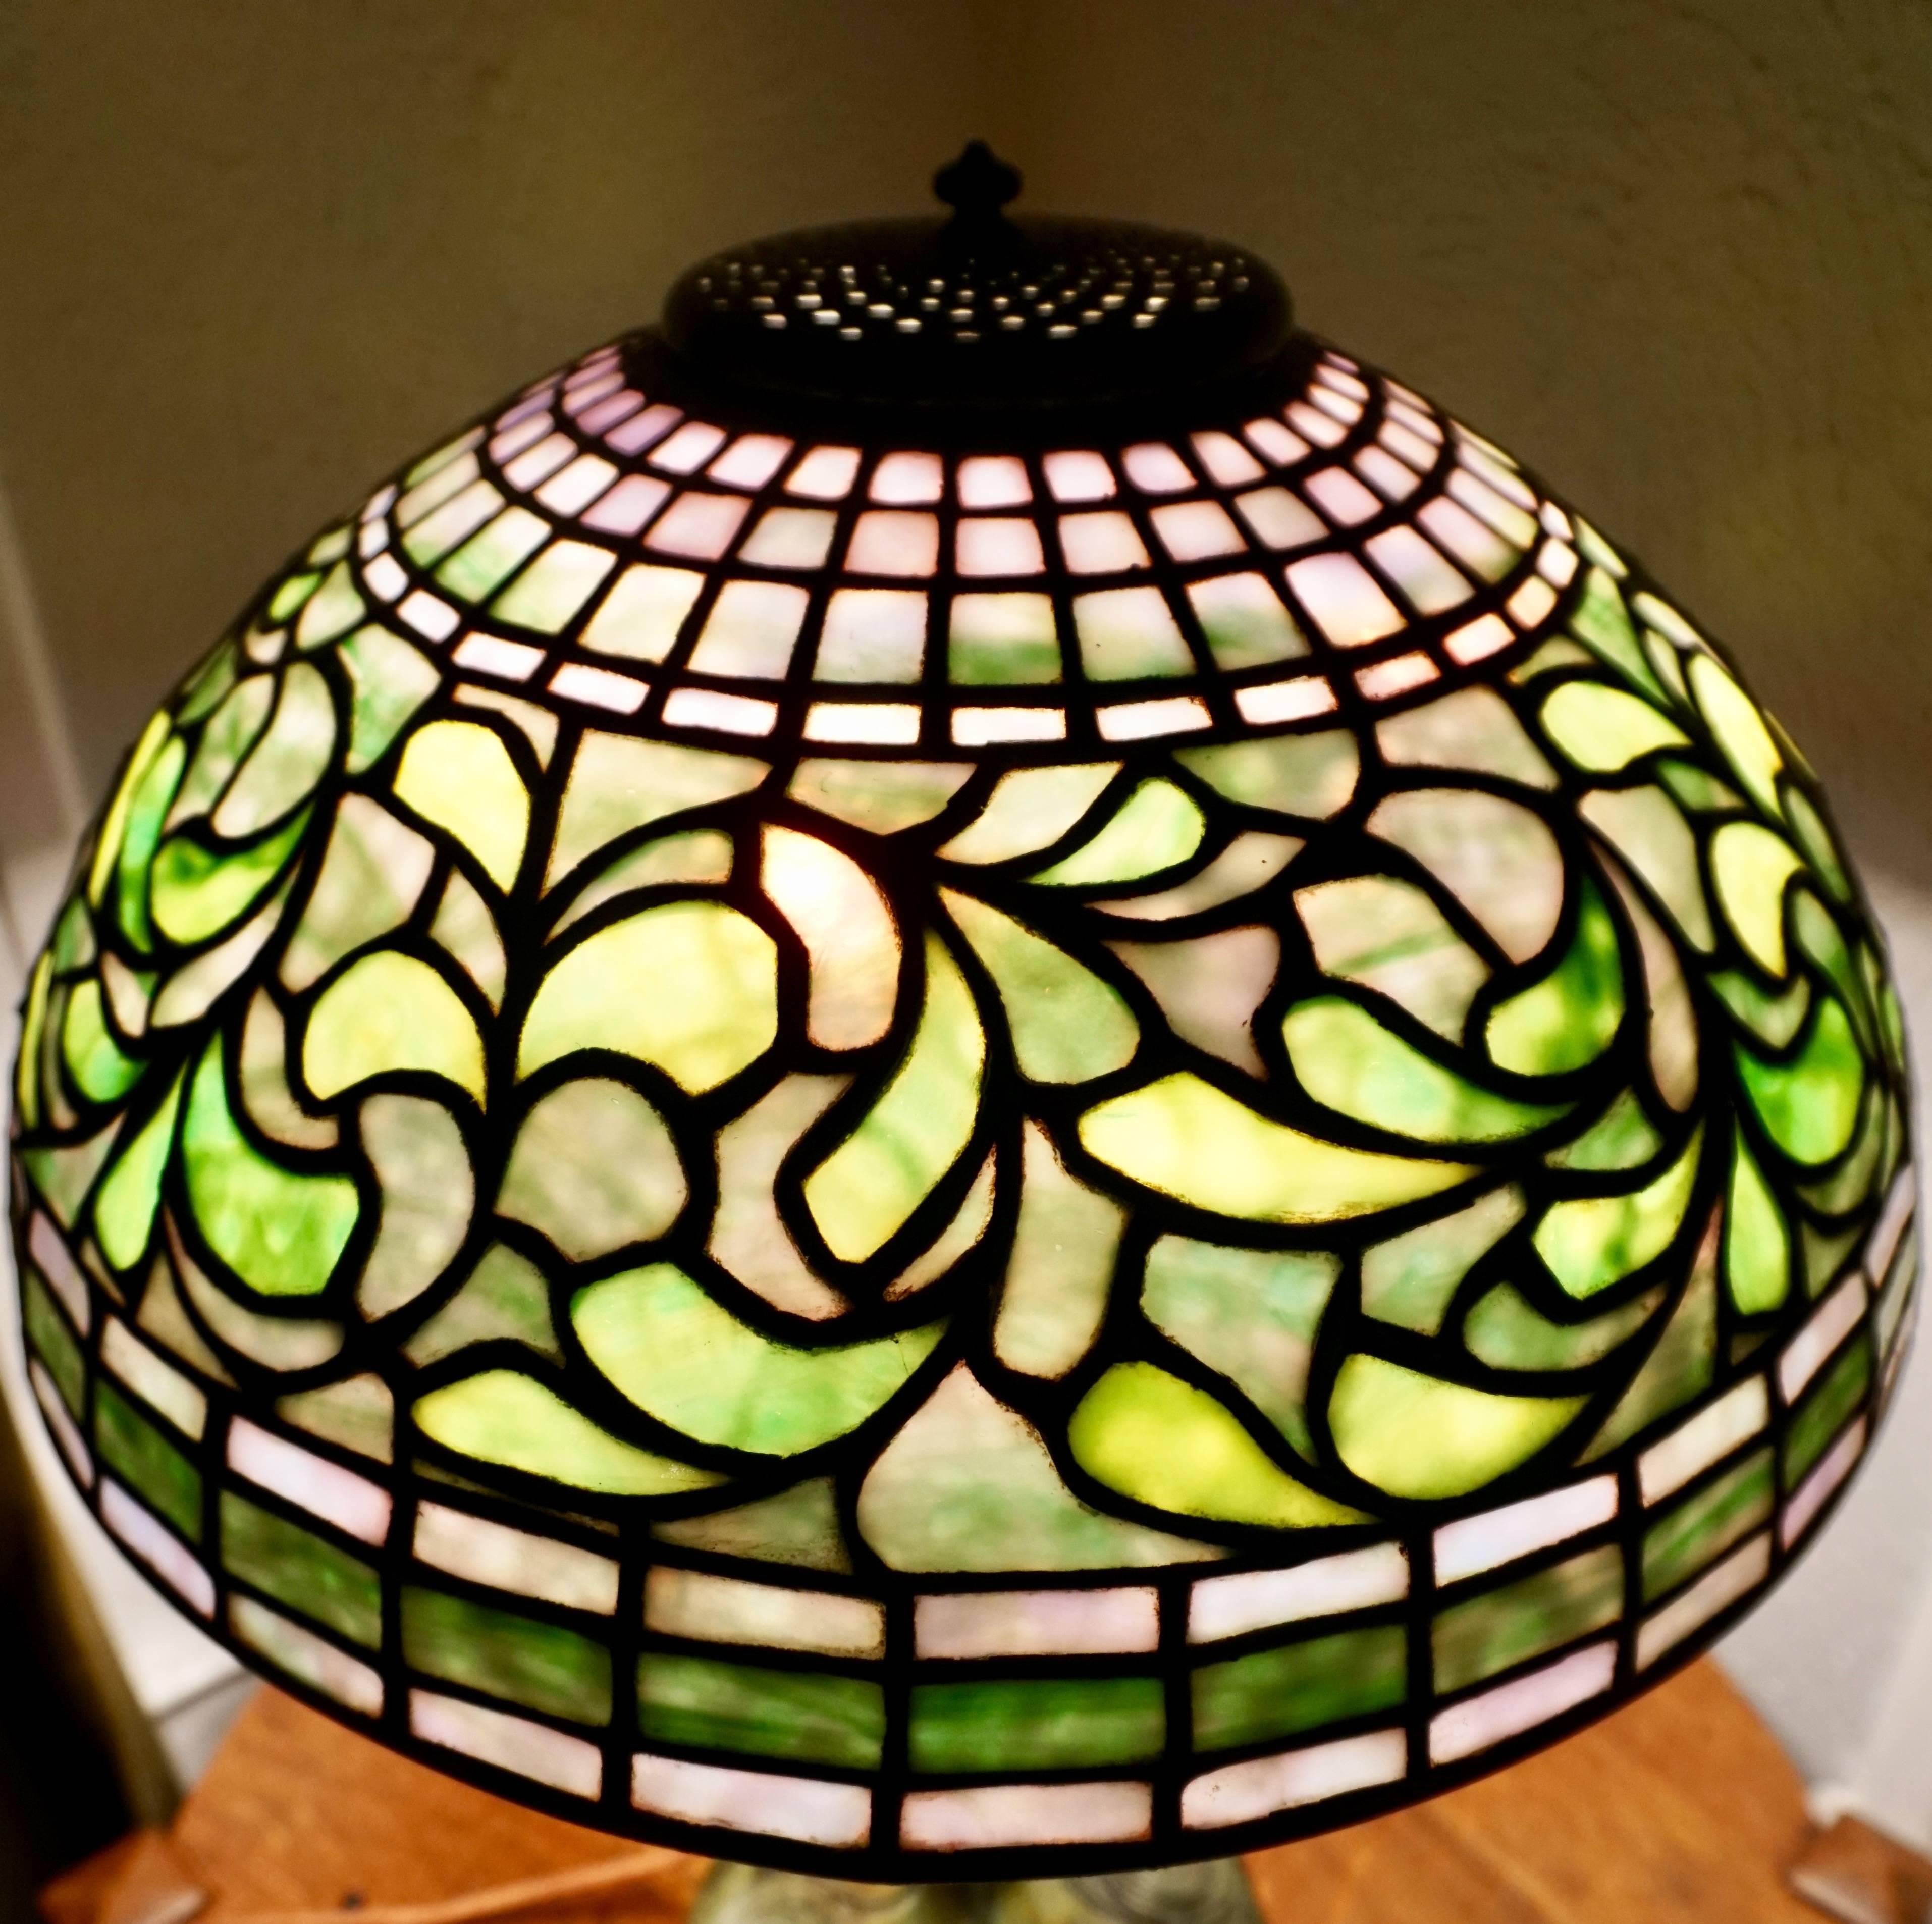 Tiffany Studios New York swirling leaf lampshade, circa 1910.

Shade Only! No heat cap or base.

Exceptional "Tiffany Studios New York 1445" shade with swirling leaf pattern with mottled greens, blues, creams and pinks. 

Very good